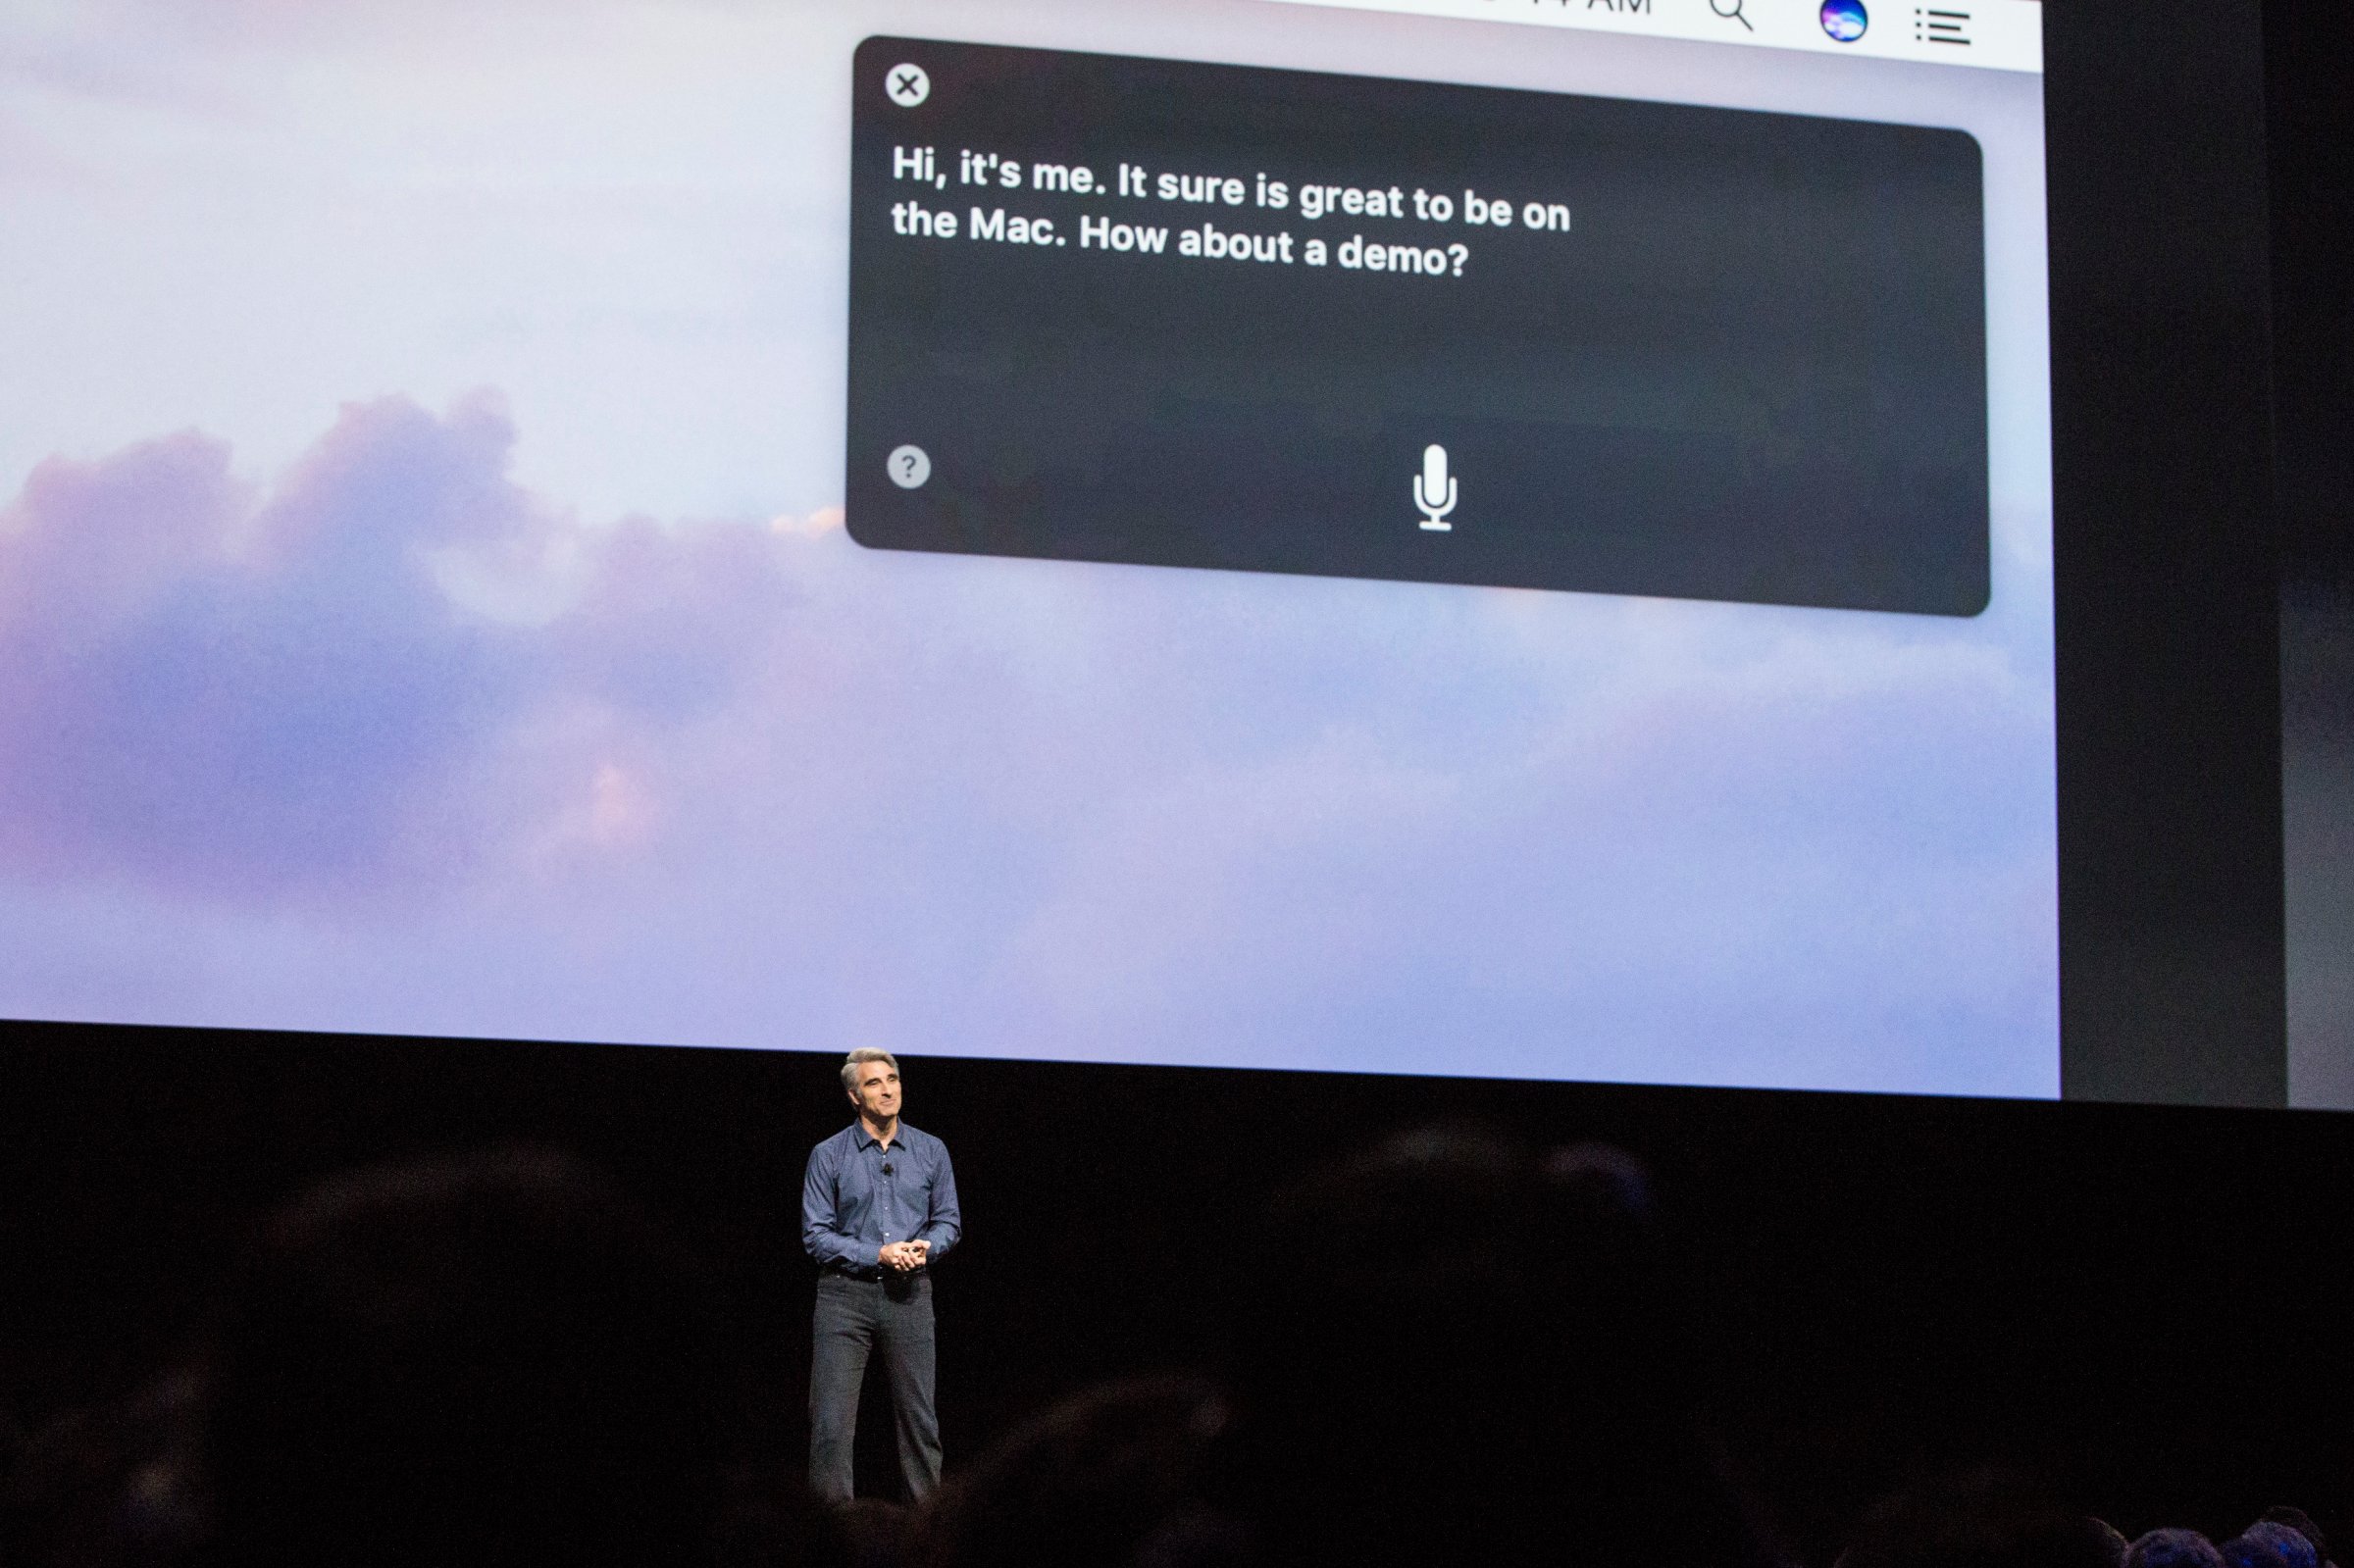 Craig Federighi, Apple's senior vice president of Software Engineering, introduces the new macOS Sierra software at an Apple event at the Worldwide Developer's Conference in San Francisco on June 13, 2016.